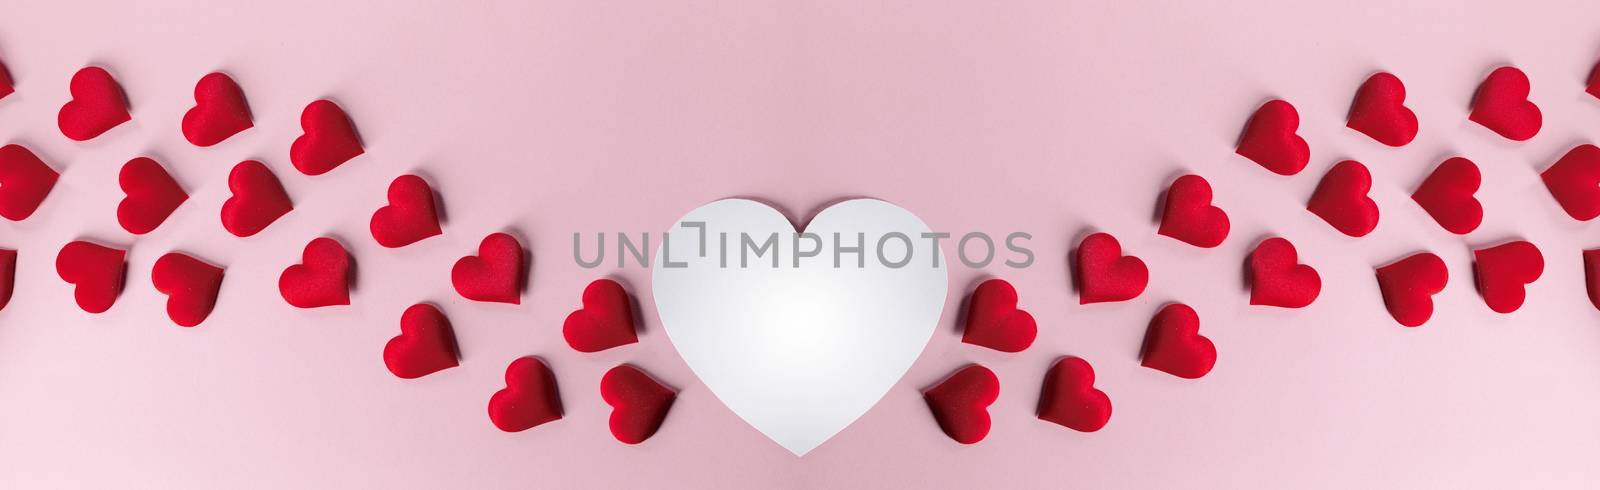 Valentine's day many red silk hearts and white heart shape card on pink paper background , border frame on red with copy space, love concept